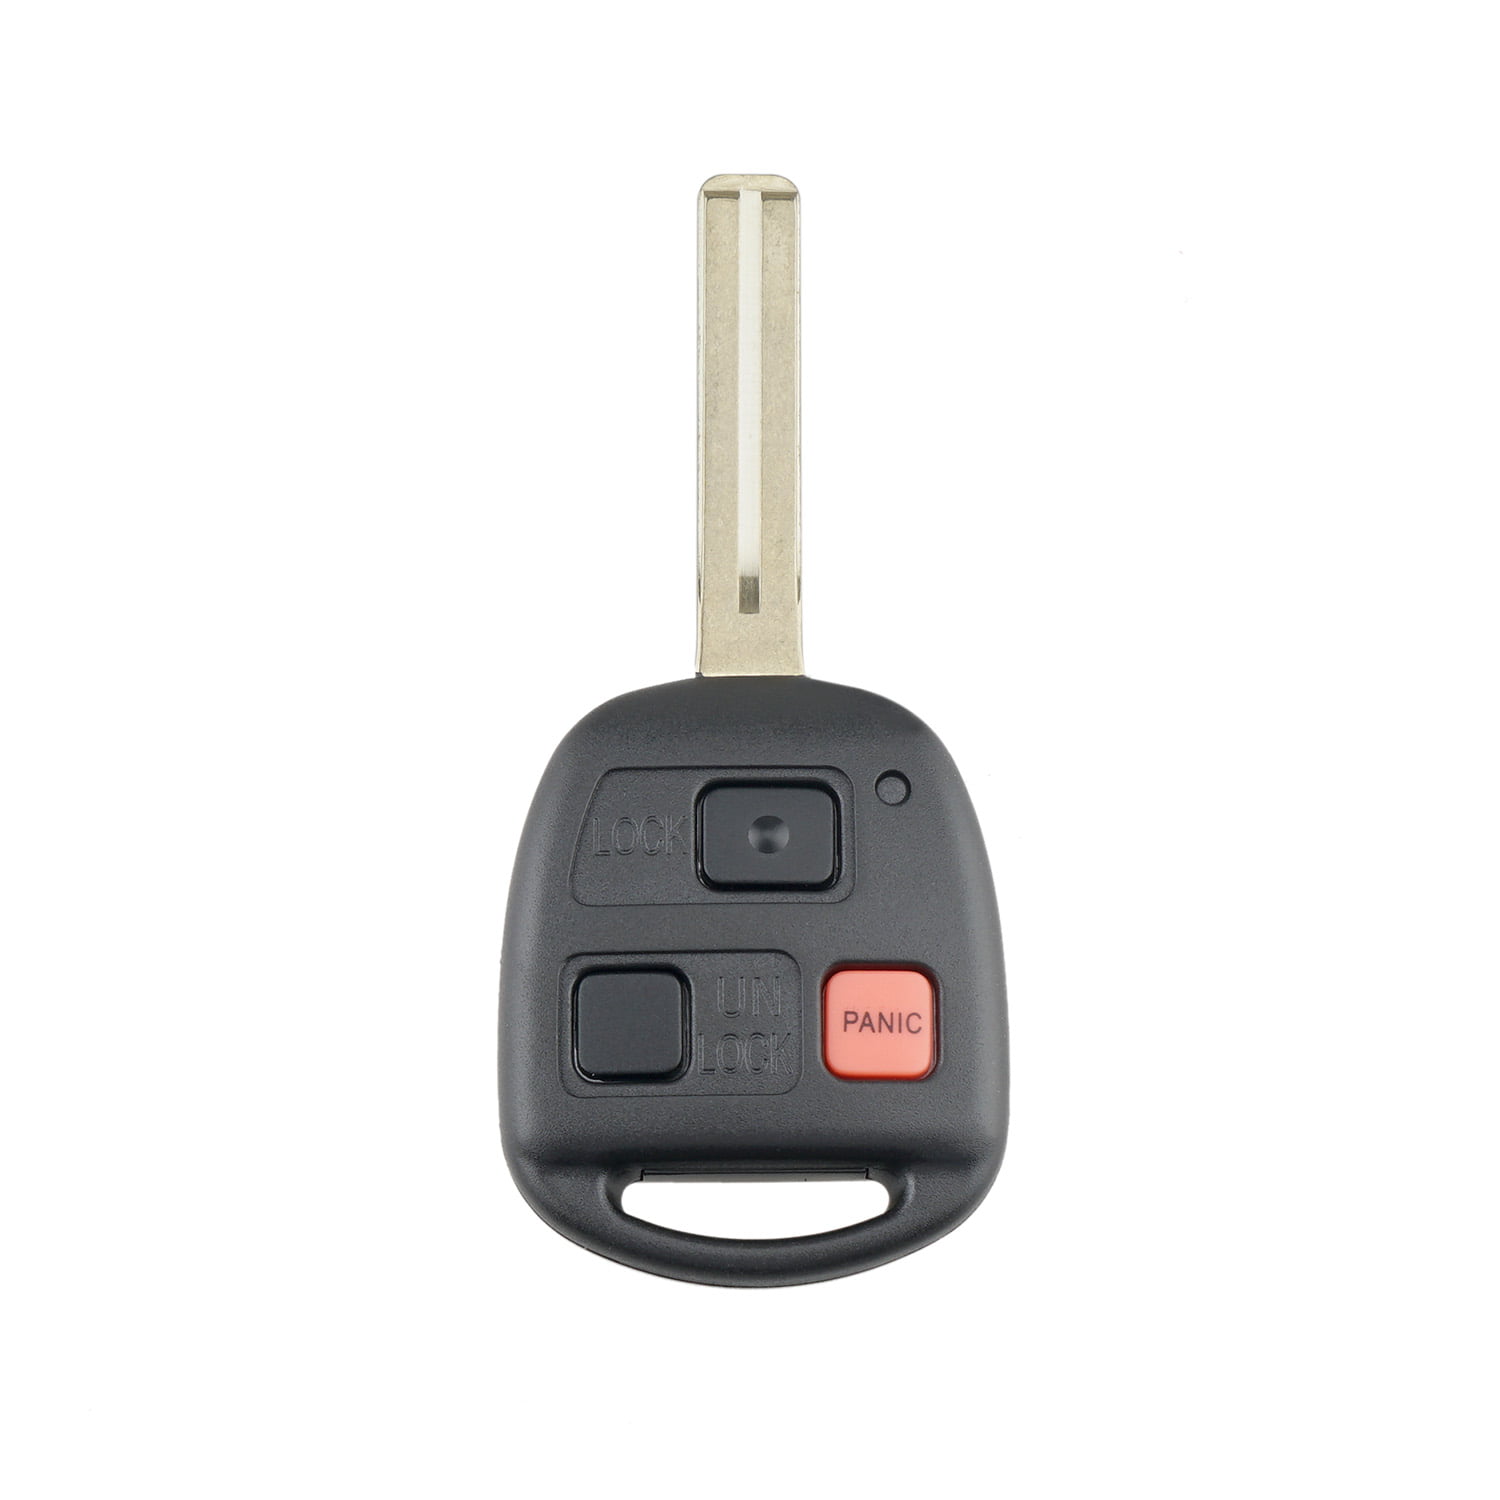 For 1999 2000 2001 2002 2003 Lexus RX300 Remote Key Fob Uncut Blade Shell Case 